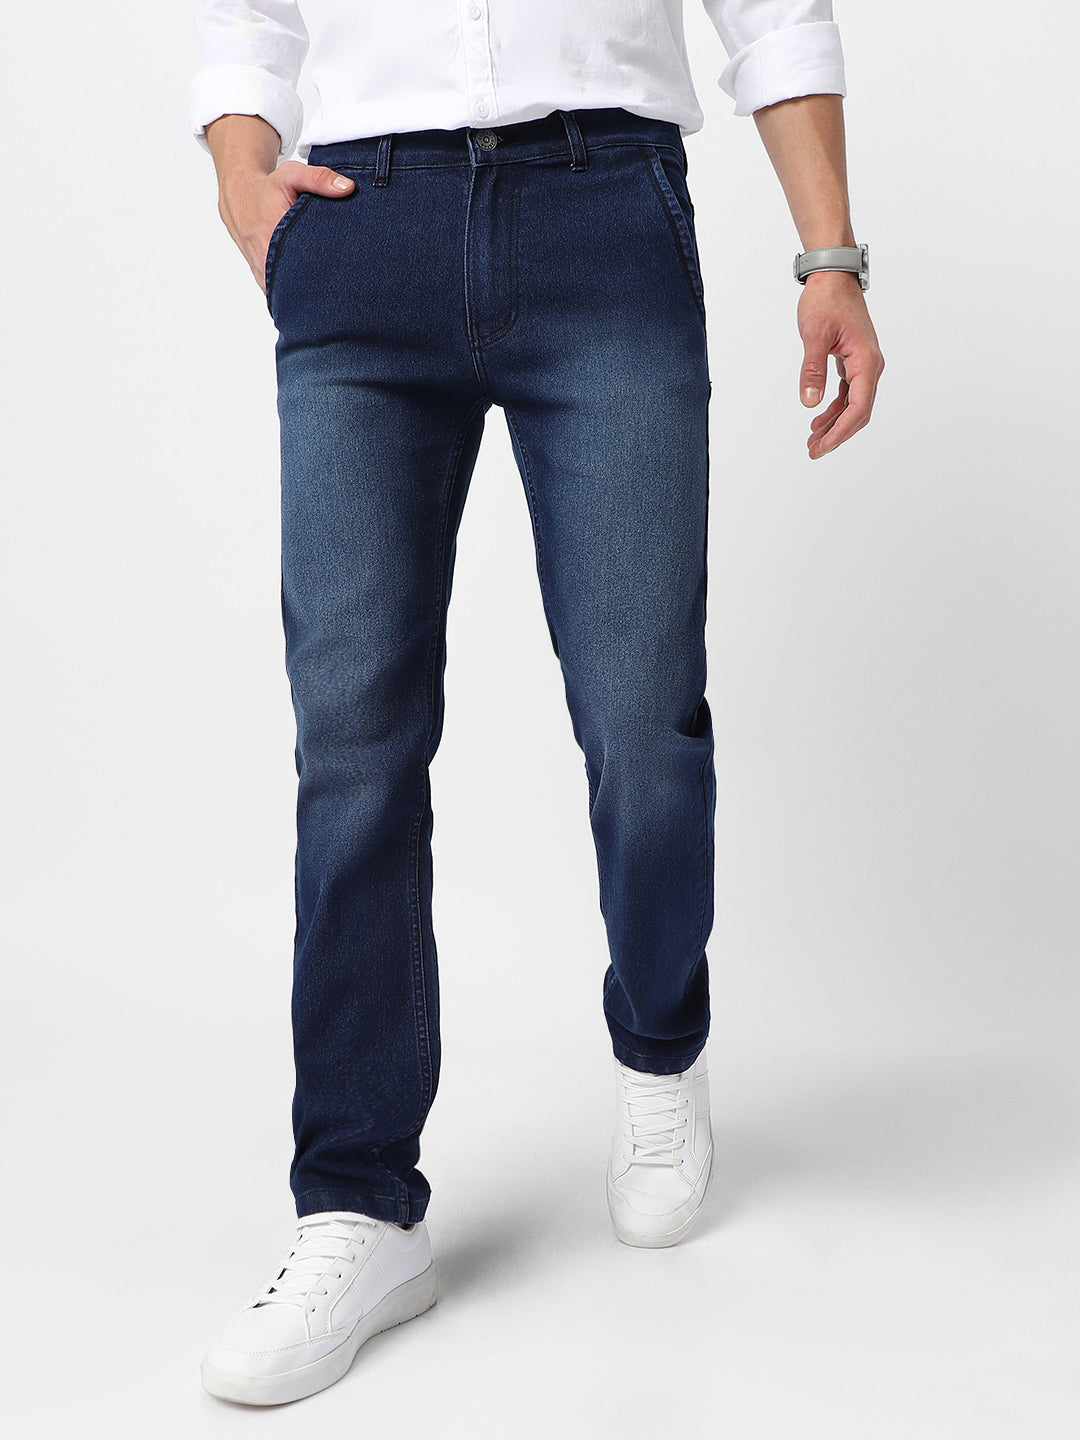 Urbano Fashion Men's Blue Regular Fit Washed Jeans Stretchable